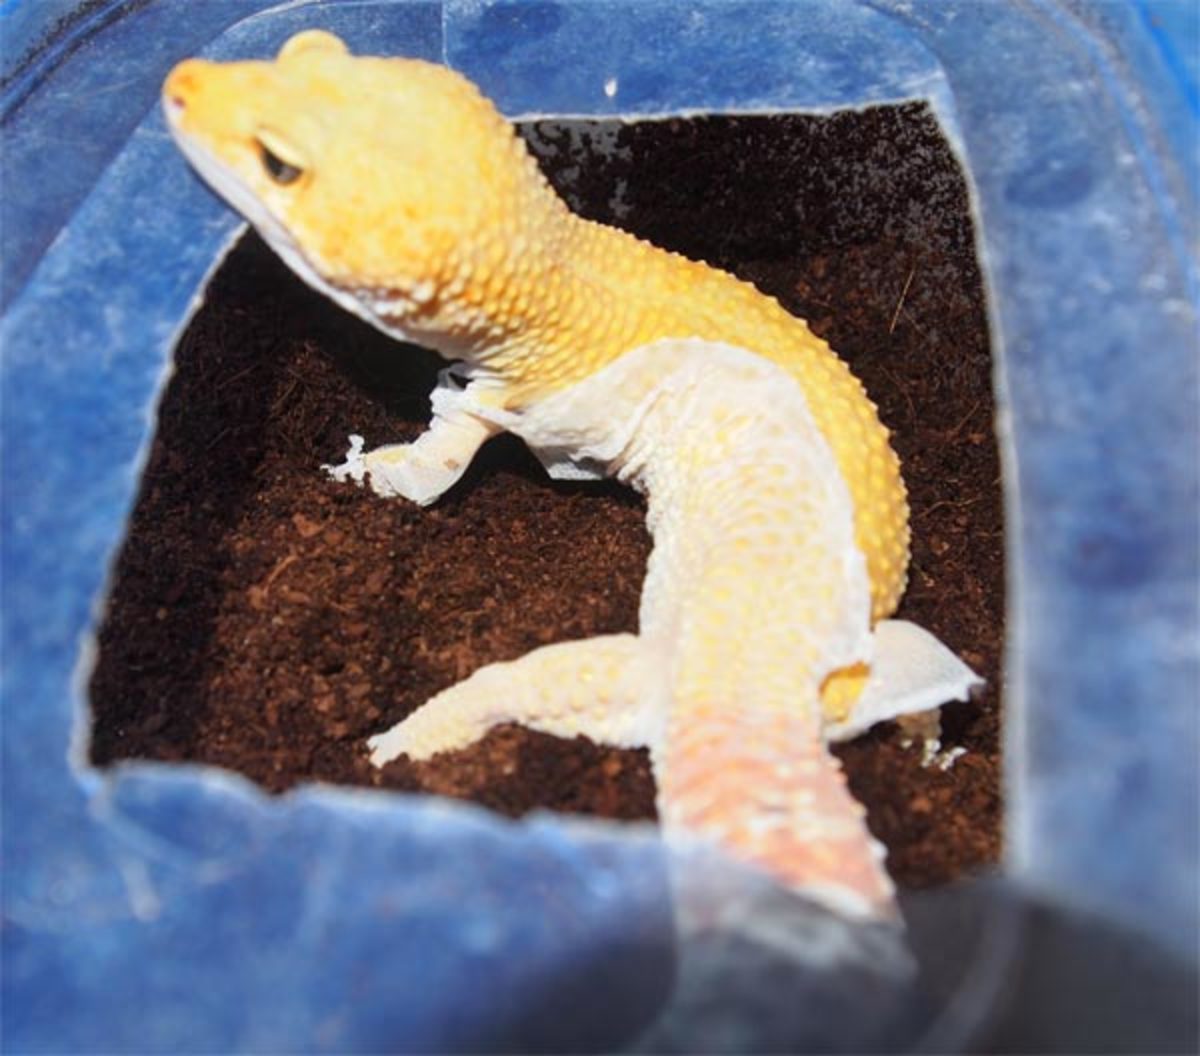 gecko-didnt-shed